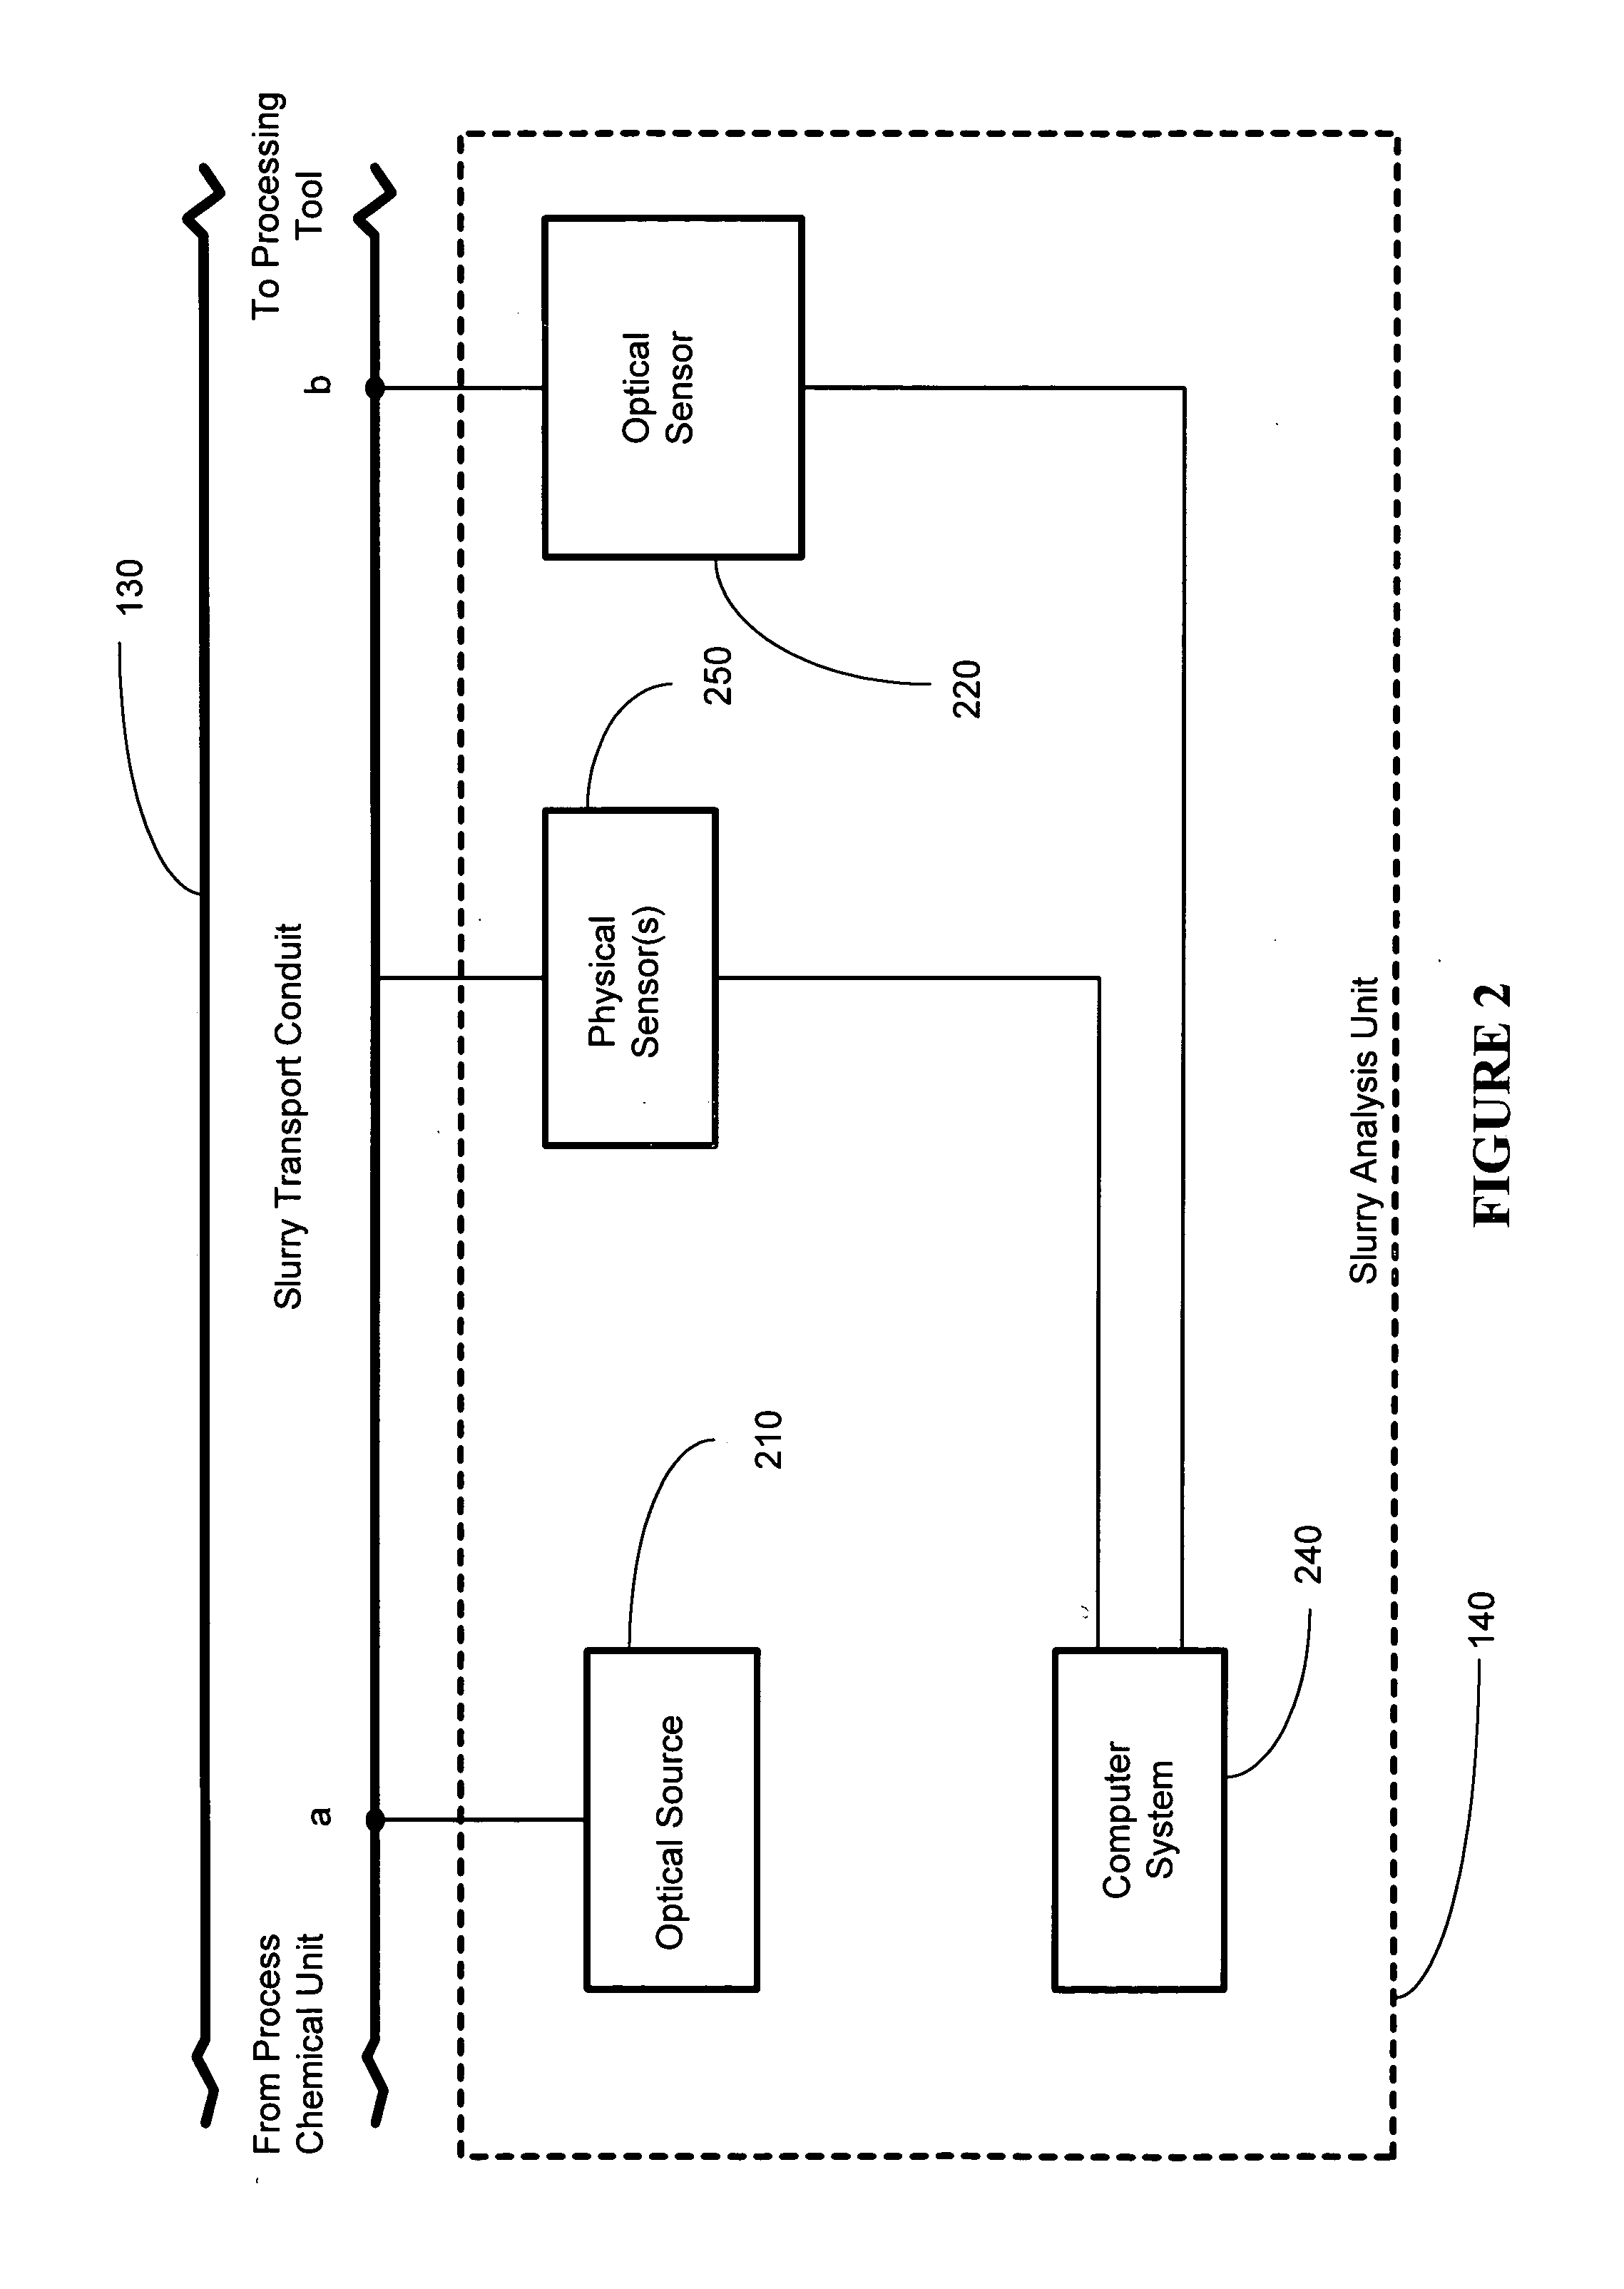 Method and apparatus for monitoring of slurry consistency